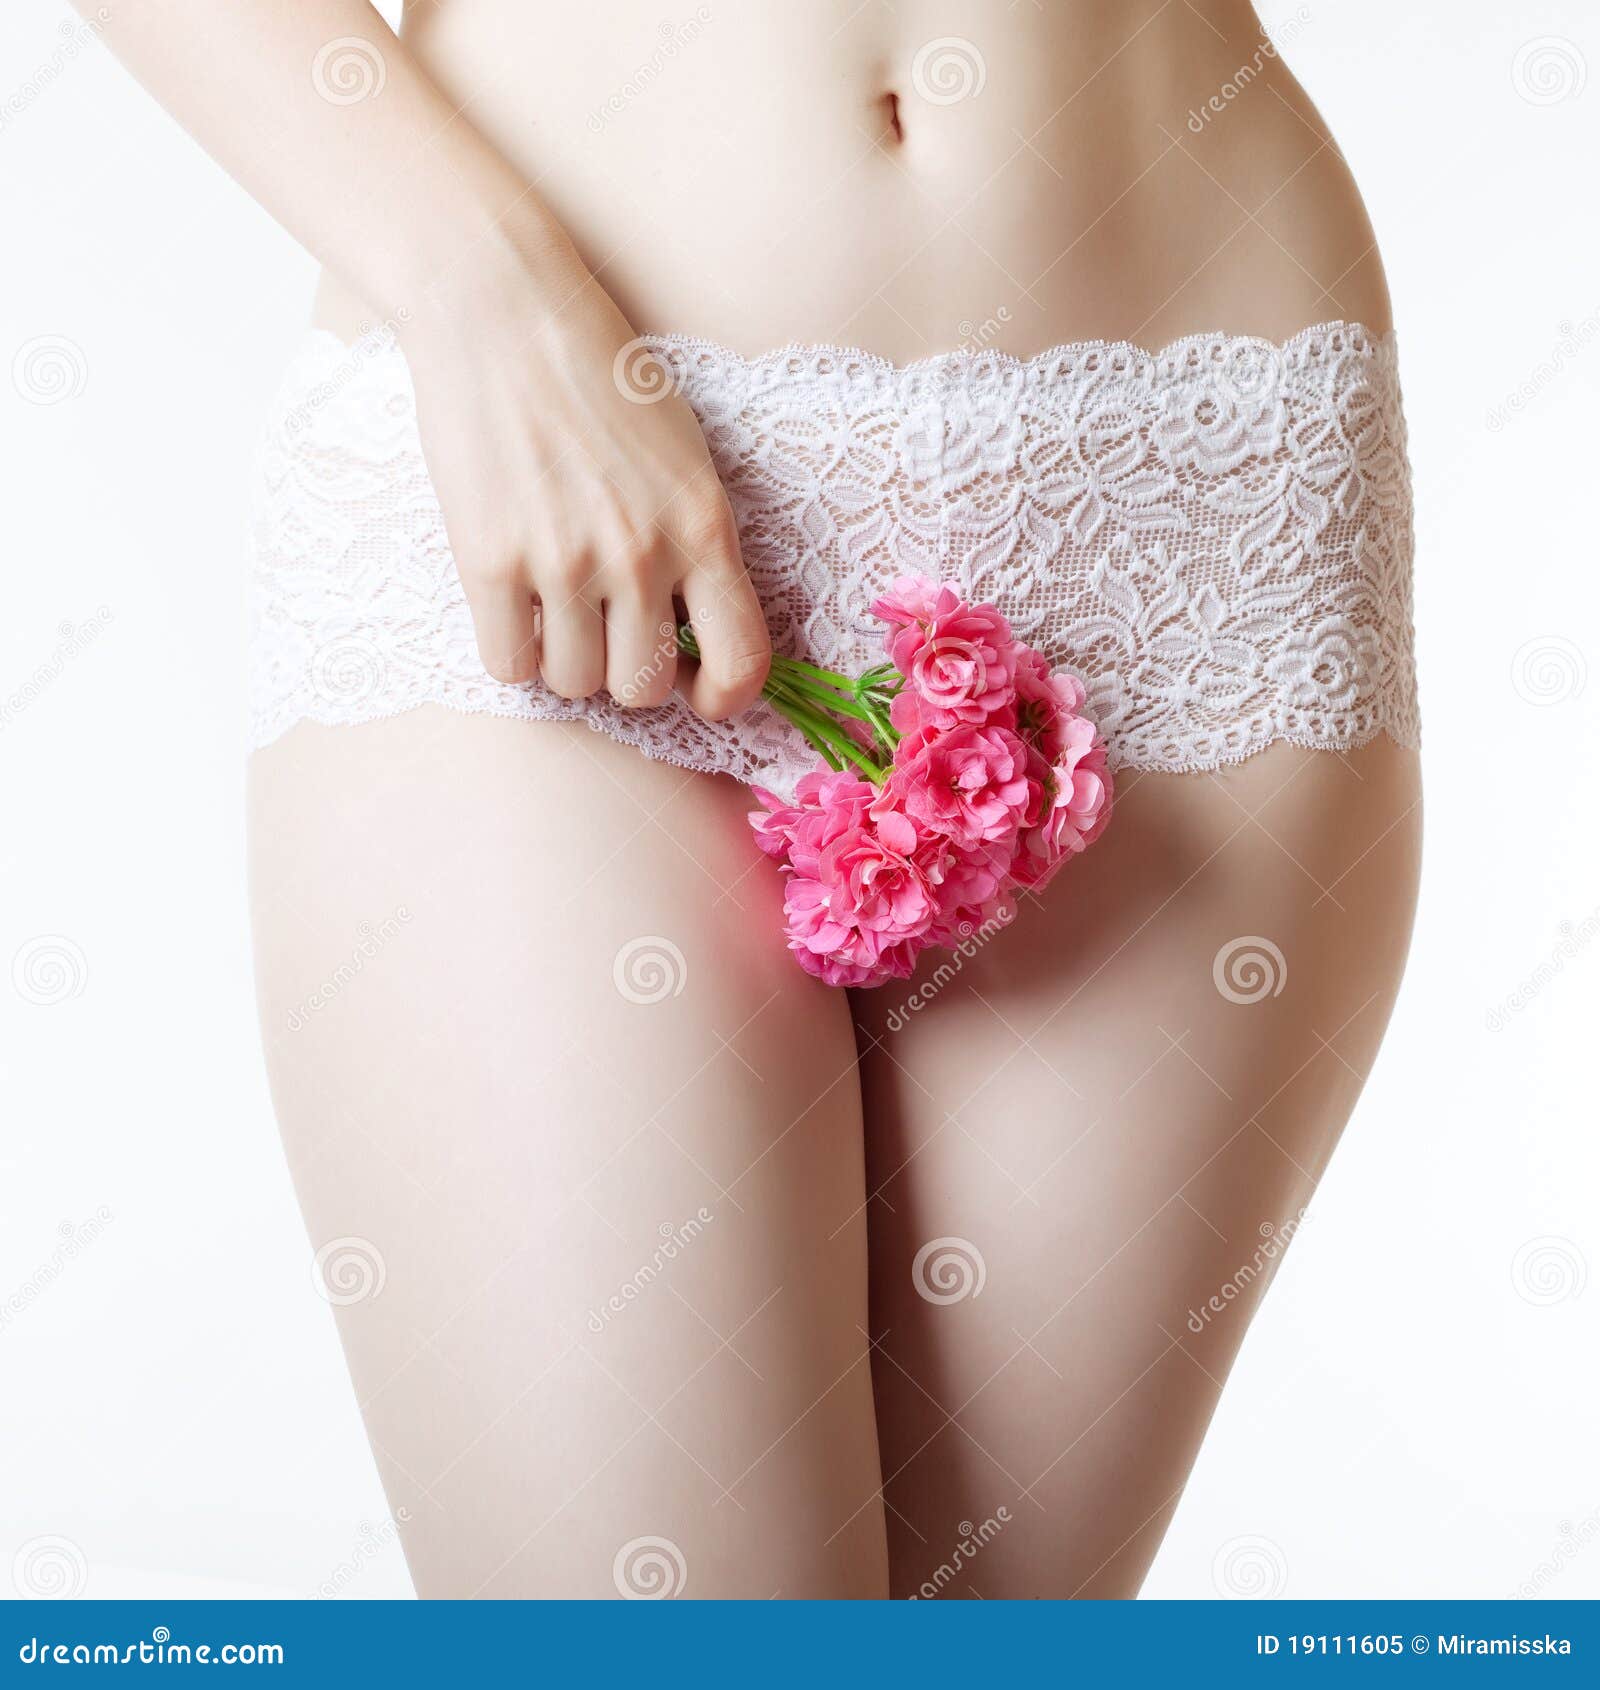 abdomen and thighs with a bunch of flowers